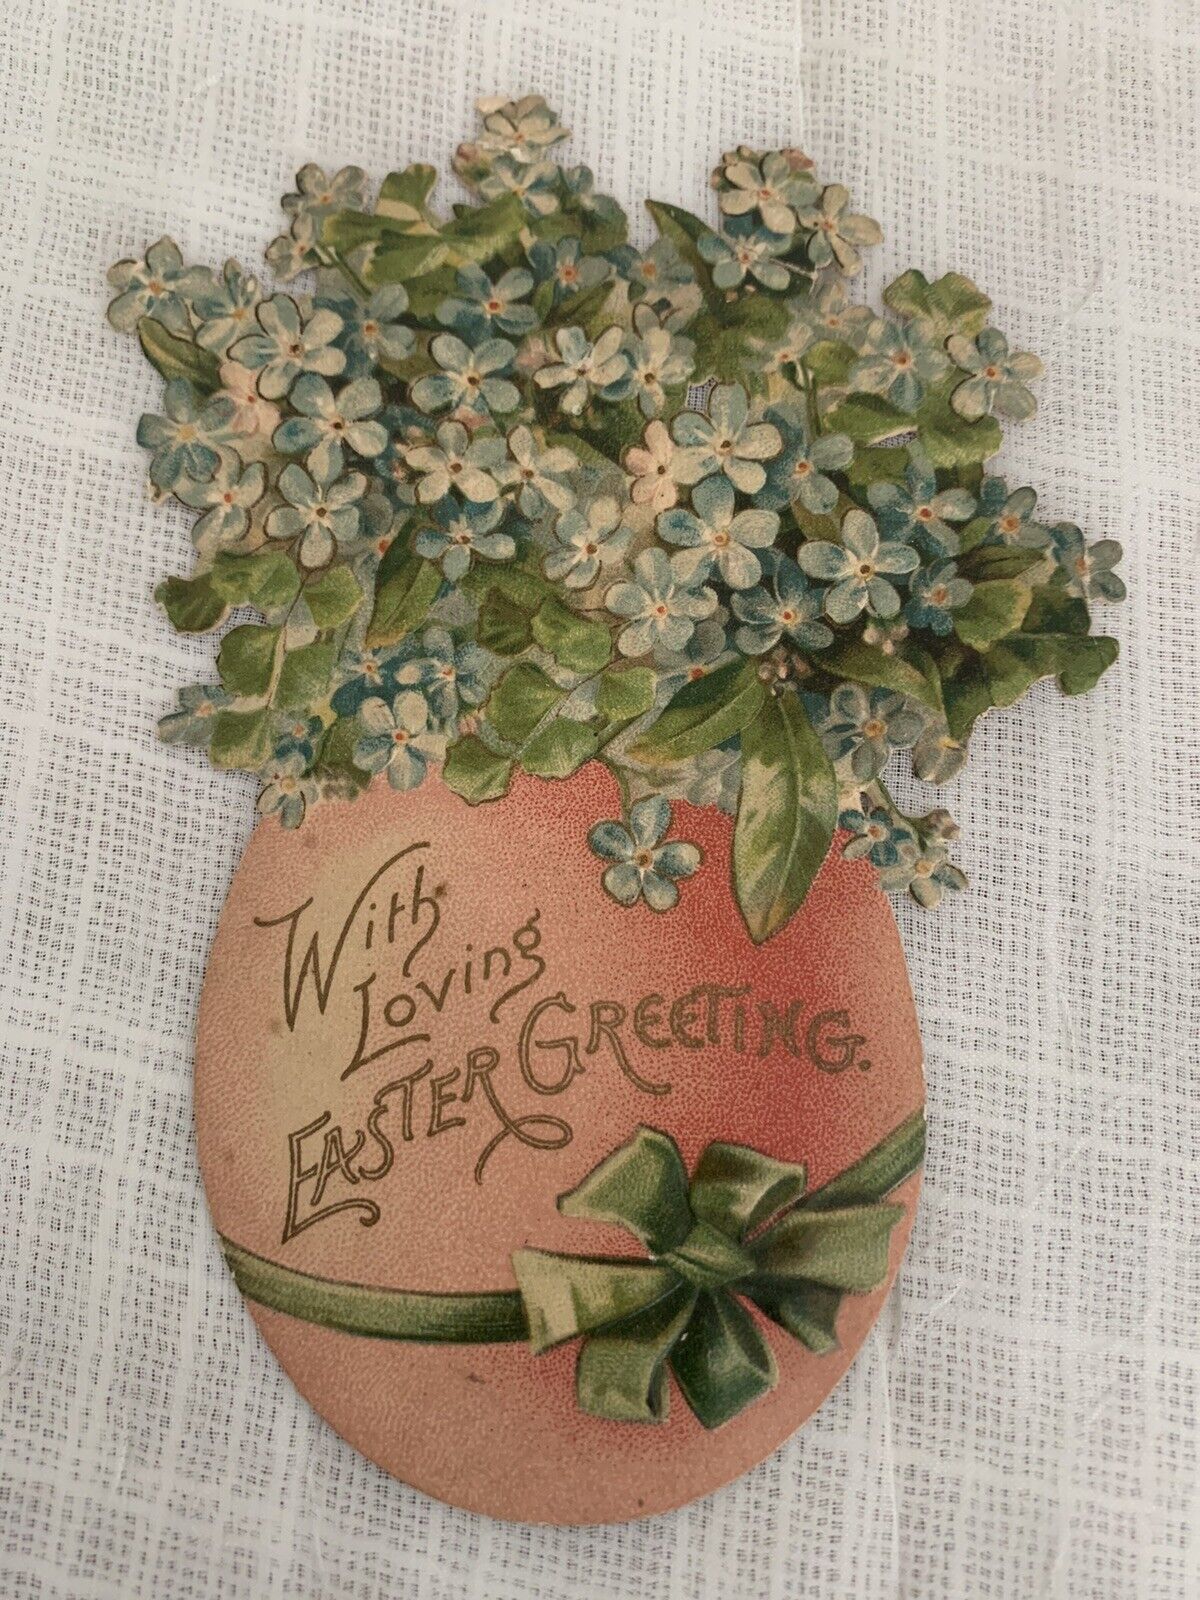 Vintage Tuck & Sons Die-cut: “With Loving Easter Greeting” Egg & Flowers Decor